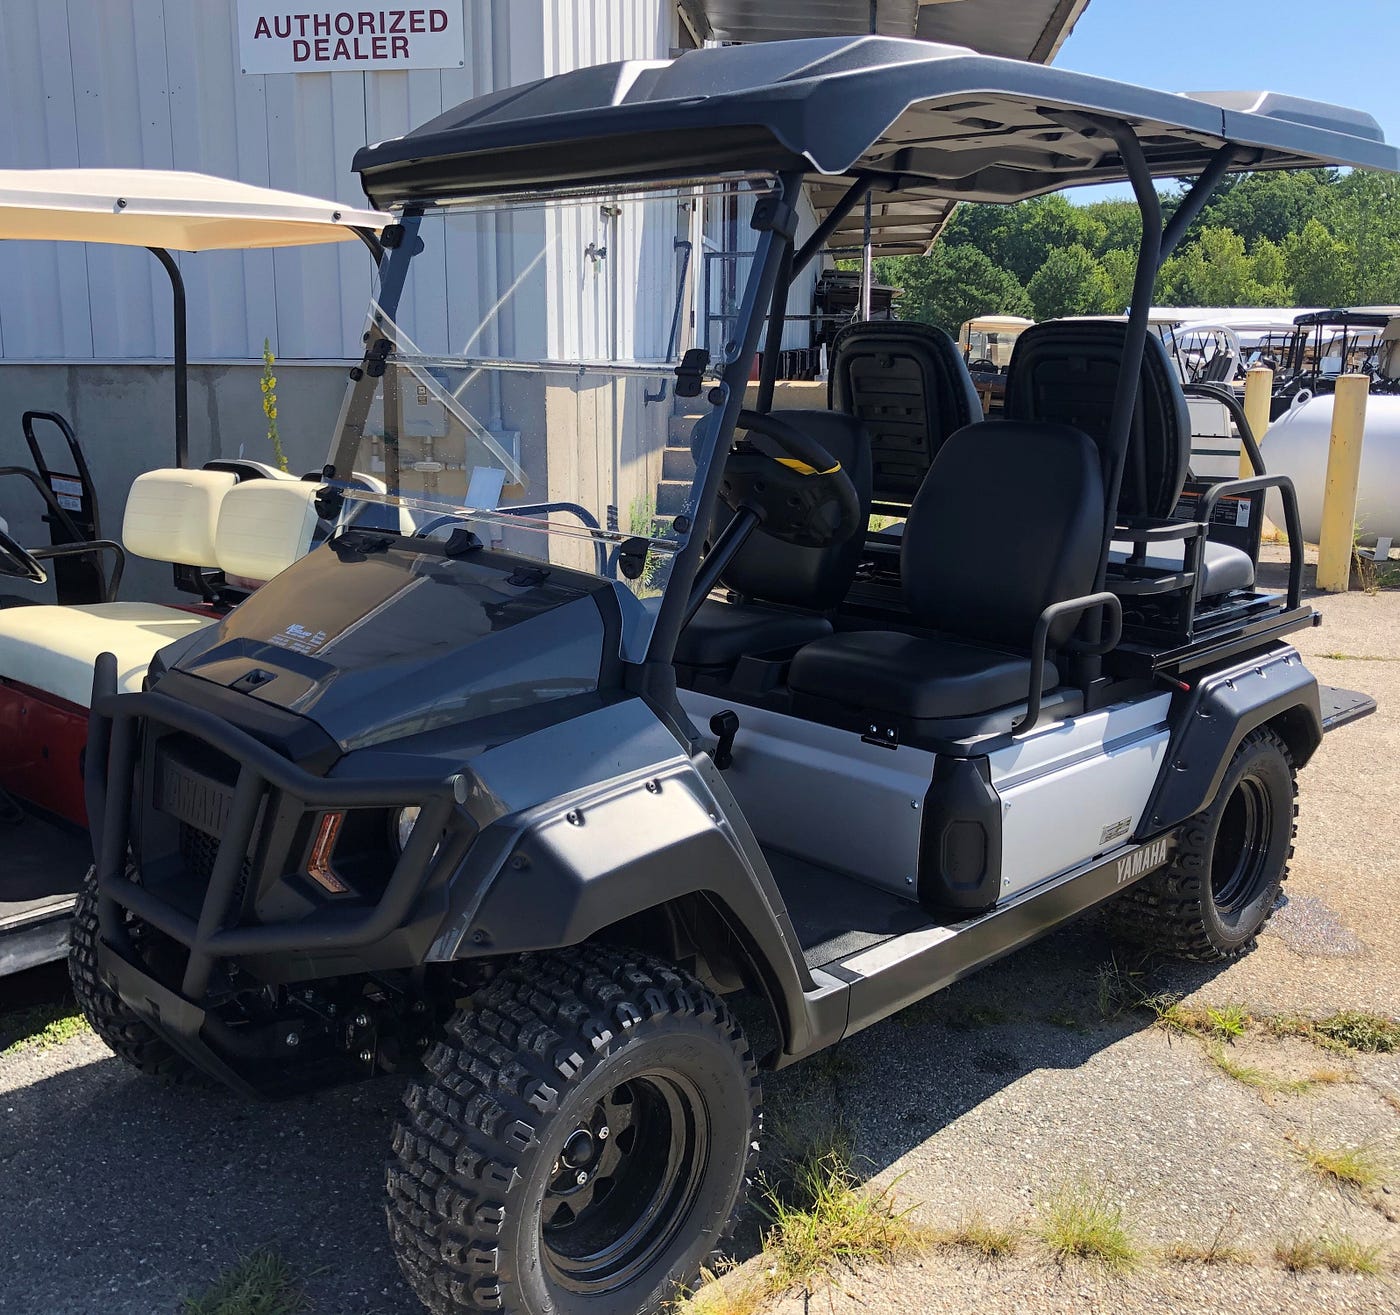 Used golf cart for sale ,
 Golf cart price,
 Club car,
 Ezgo golf cart,
 Yamaha golf cart,
 Electric golf cart,
 Best golf cart,
 Golf push cart,